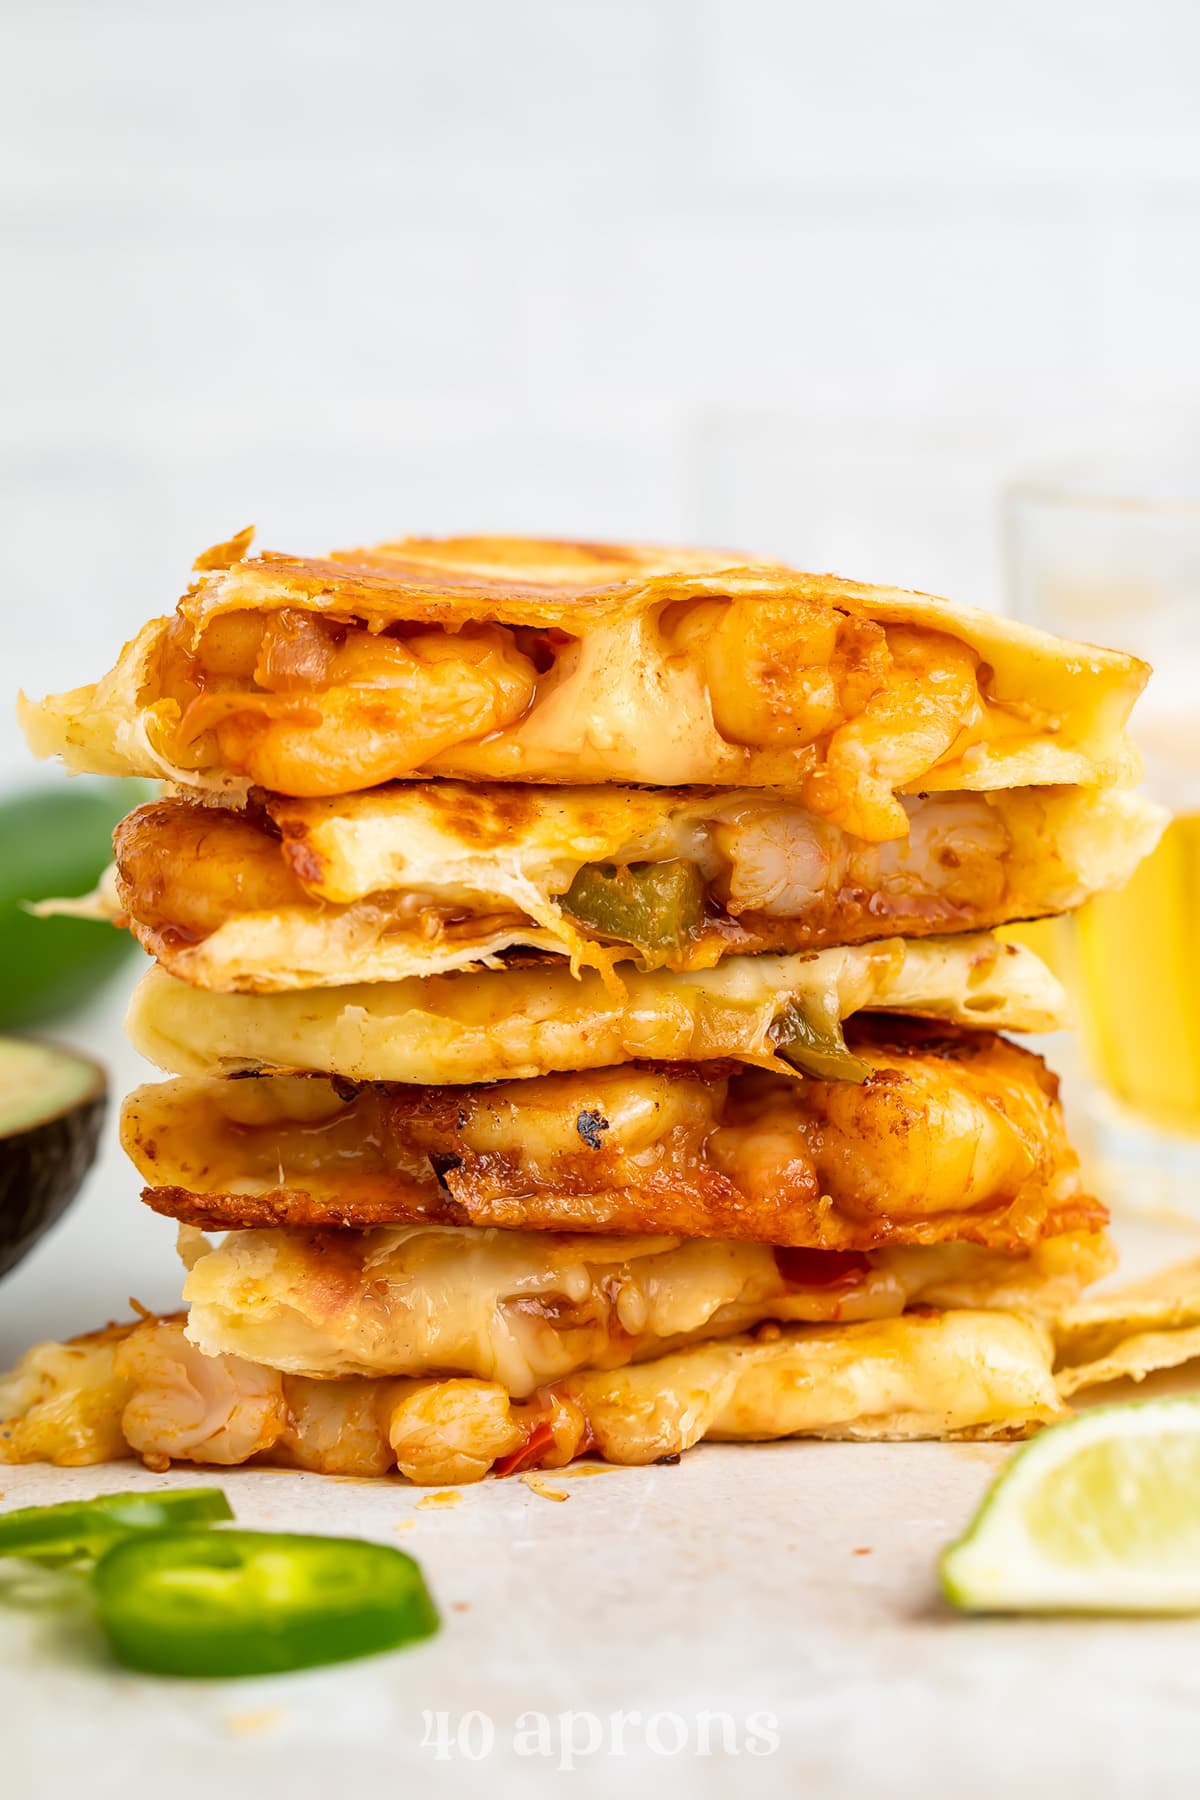 Shrimp quesadilla wedges stacked on top of eachother with cheese oozing out the sides.